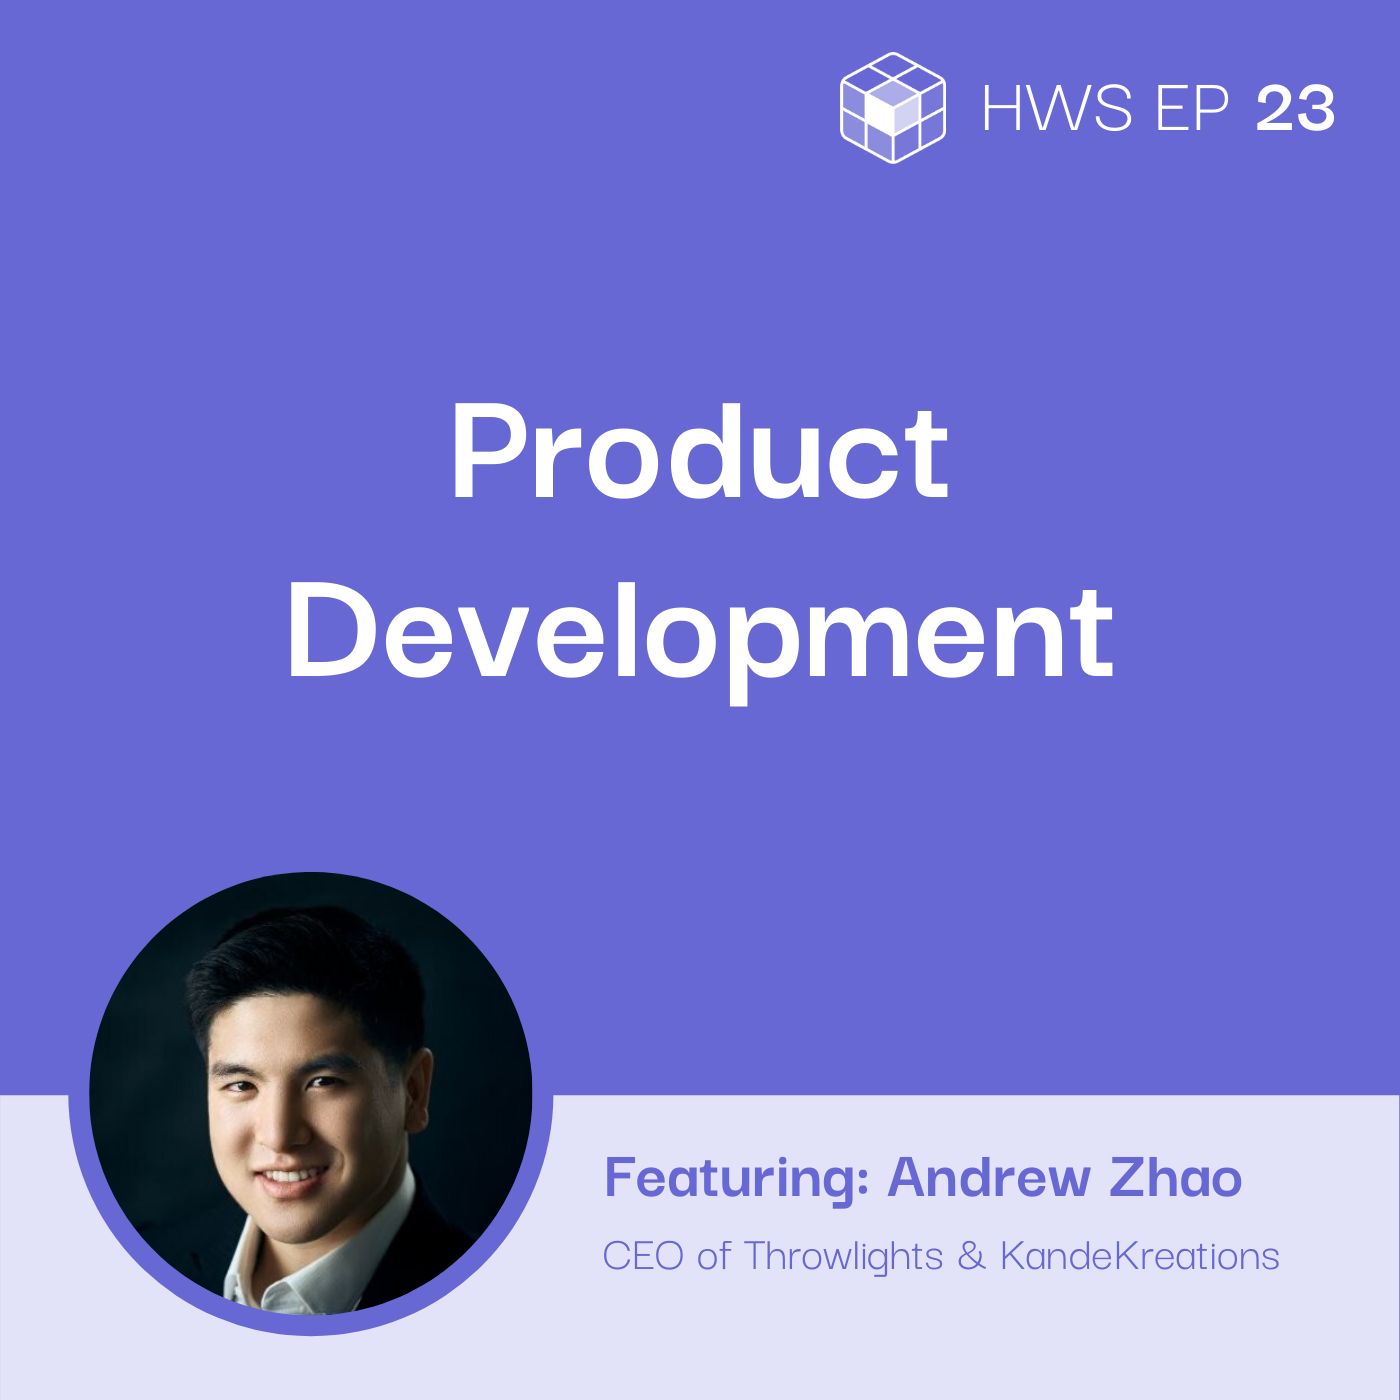 Andrew Zhao from Throwlights talks about LED lights shows as performance art, and the process of product development for niche markets